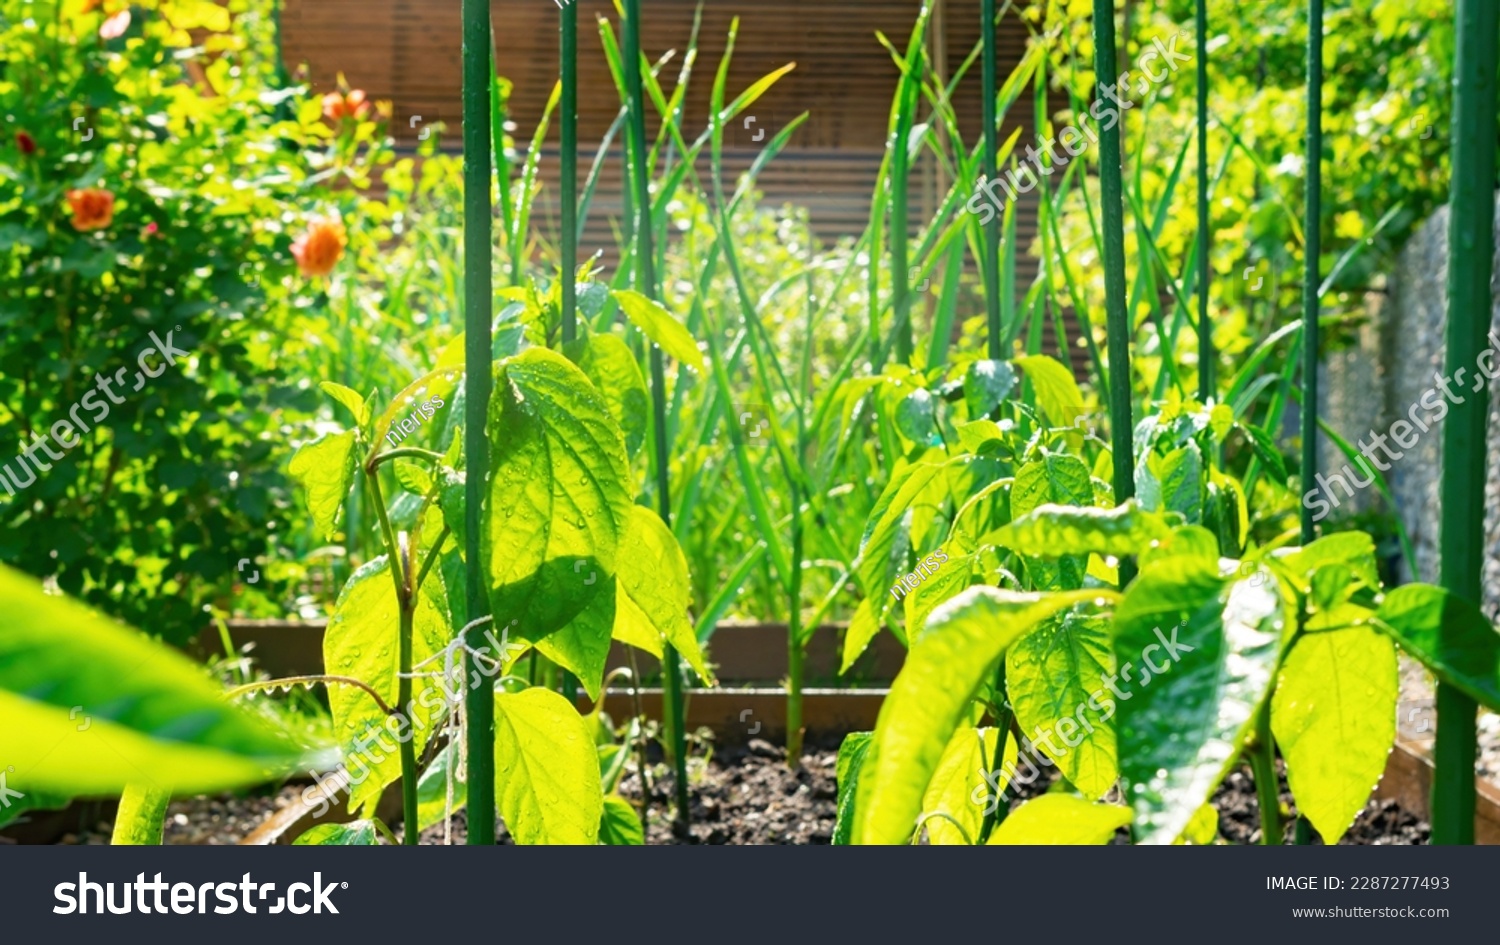 Fresh greens in the vegetable garden. Beautiful modern garden design with wooden raised beds. Staked seedlings of pepper after the rain close-up. Sunny morning in a domestic organic garden. #2287277493